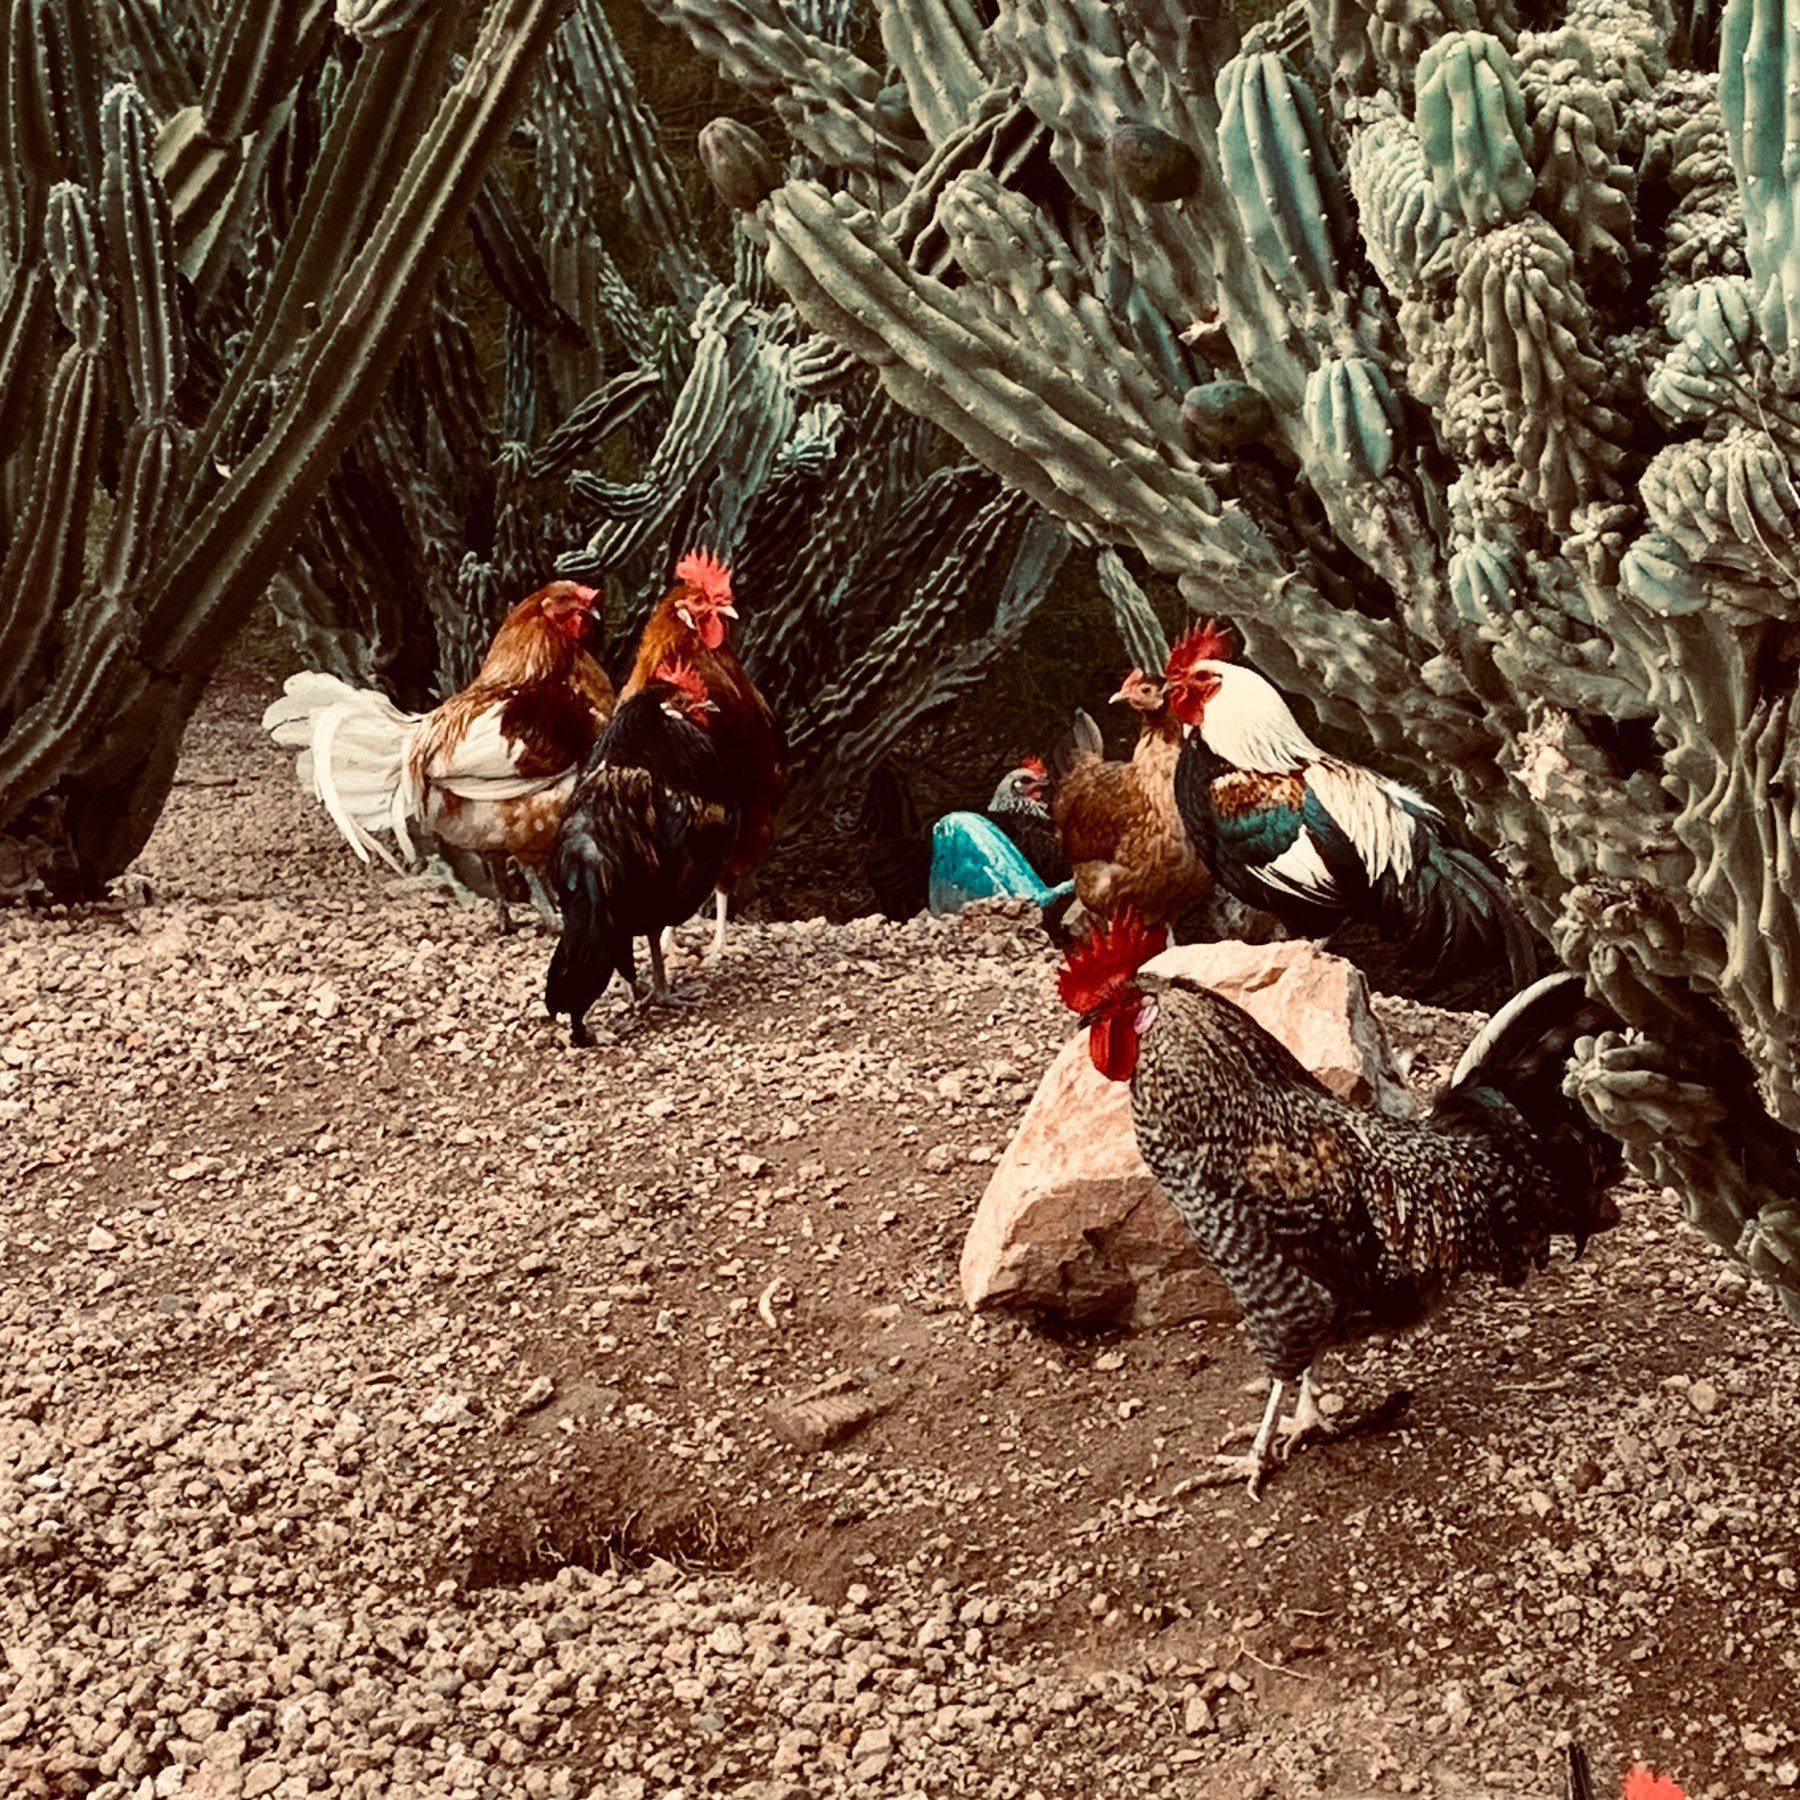 A few feral chickens by the night blooming cereus.